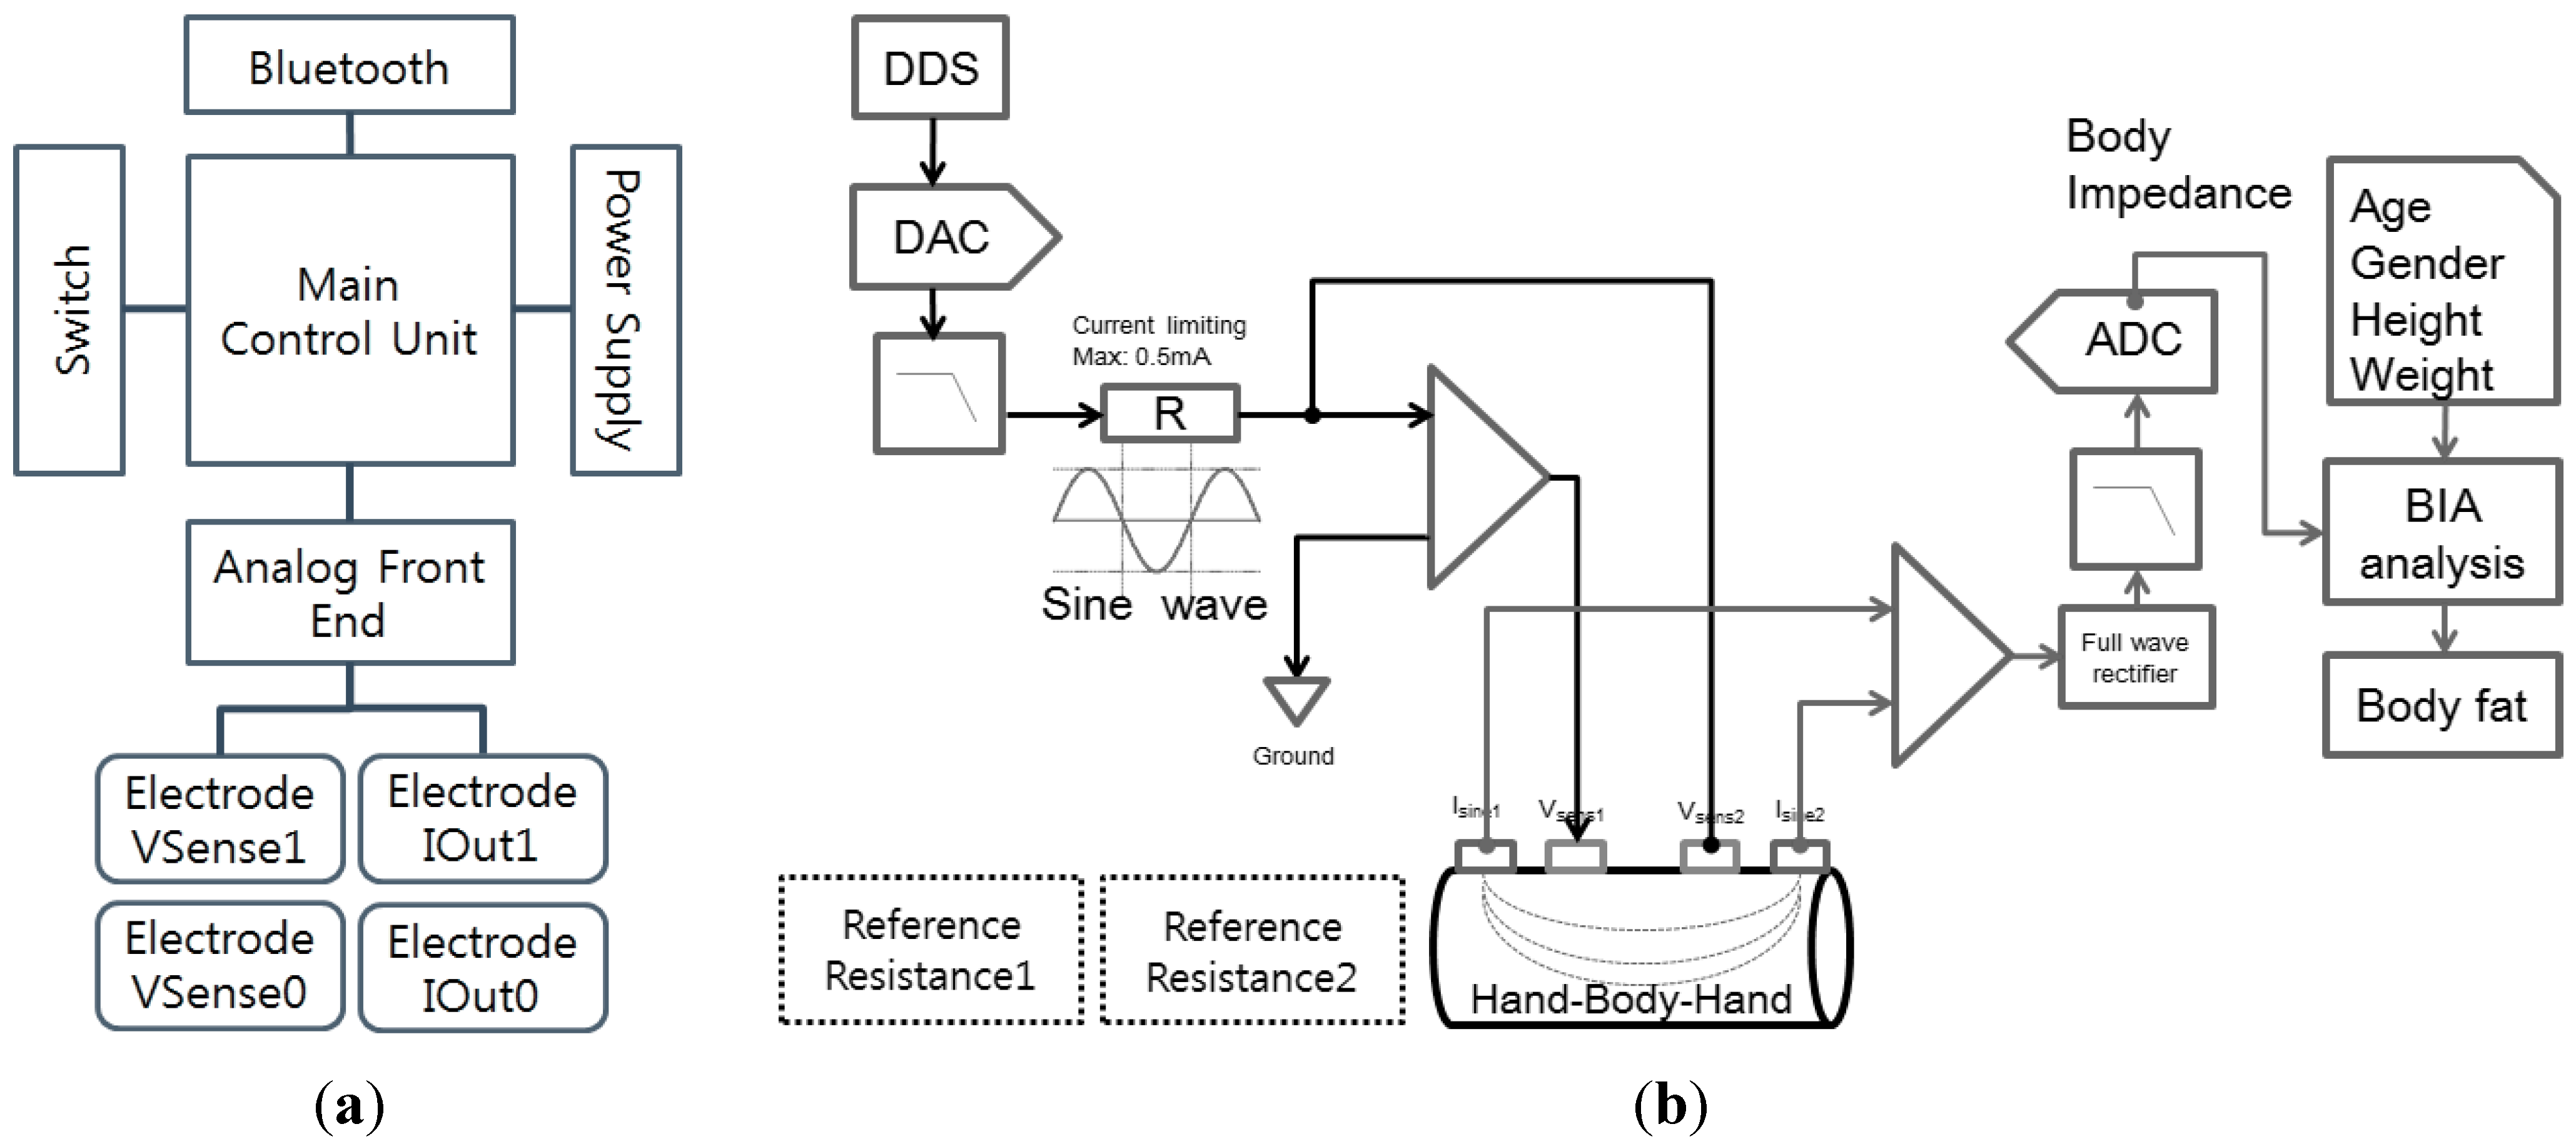 Sample characteristics of the bioelectrical impedance analysis